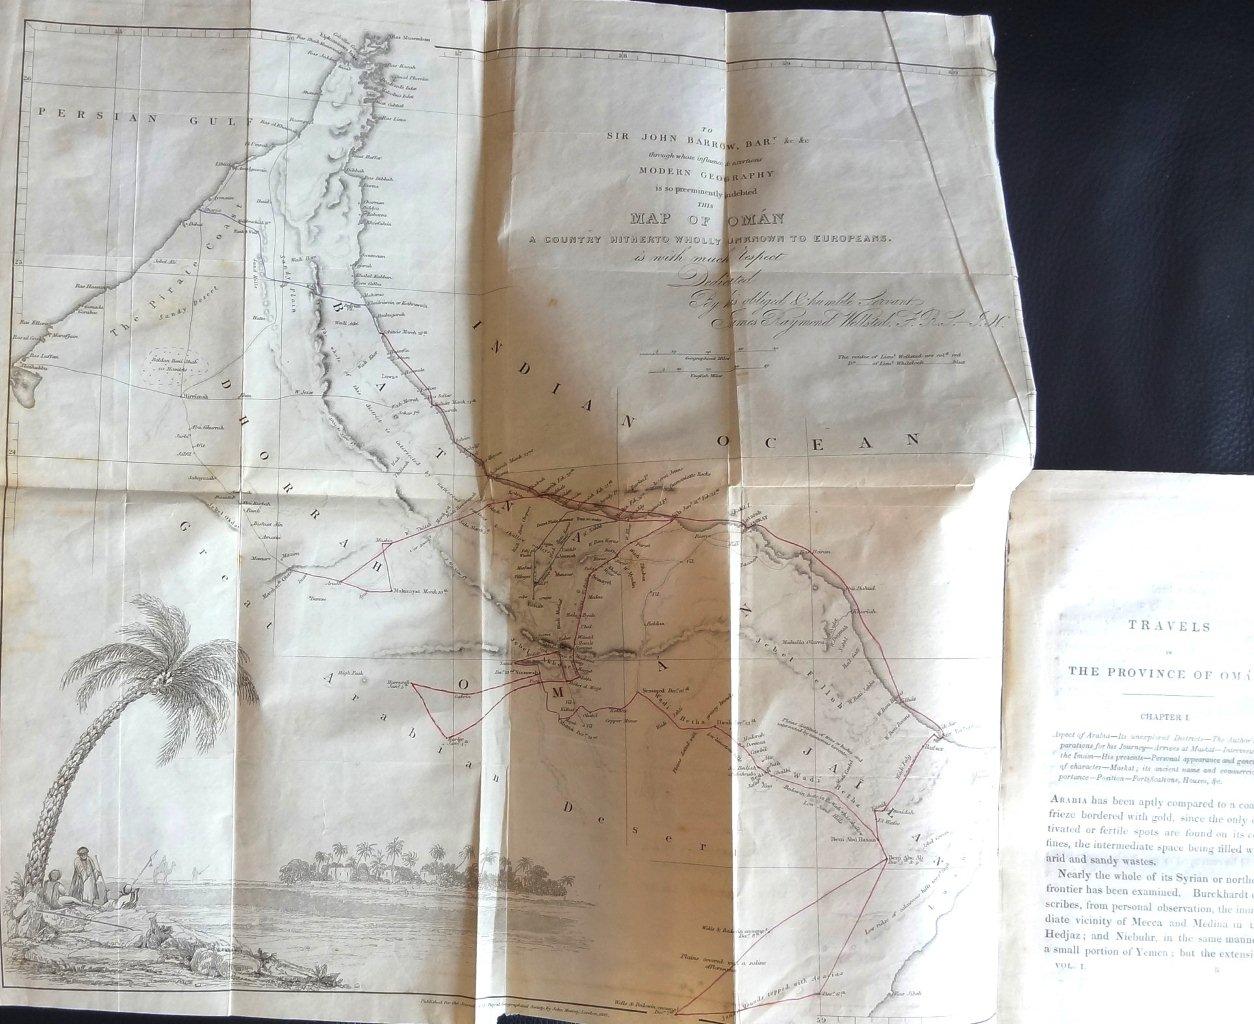 Wellsted produced the first detailed map of the interior of Oman